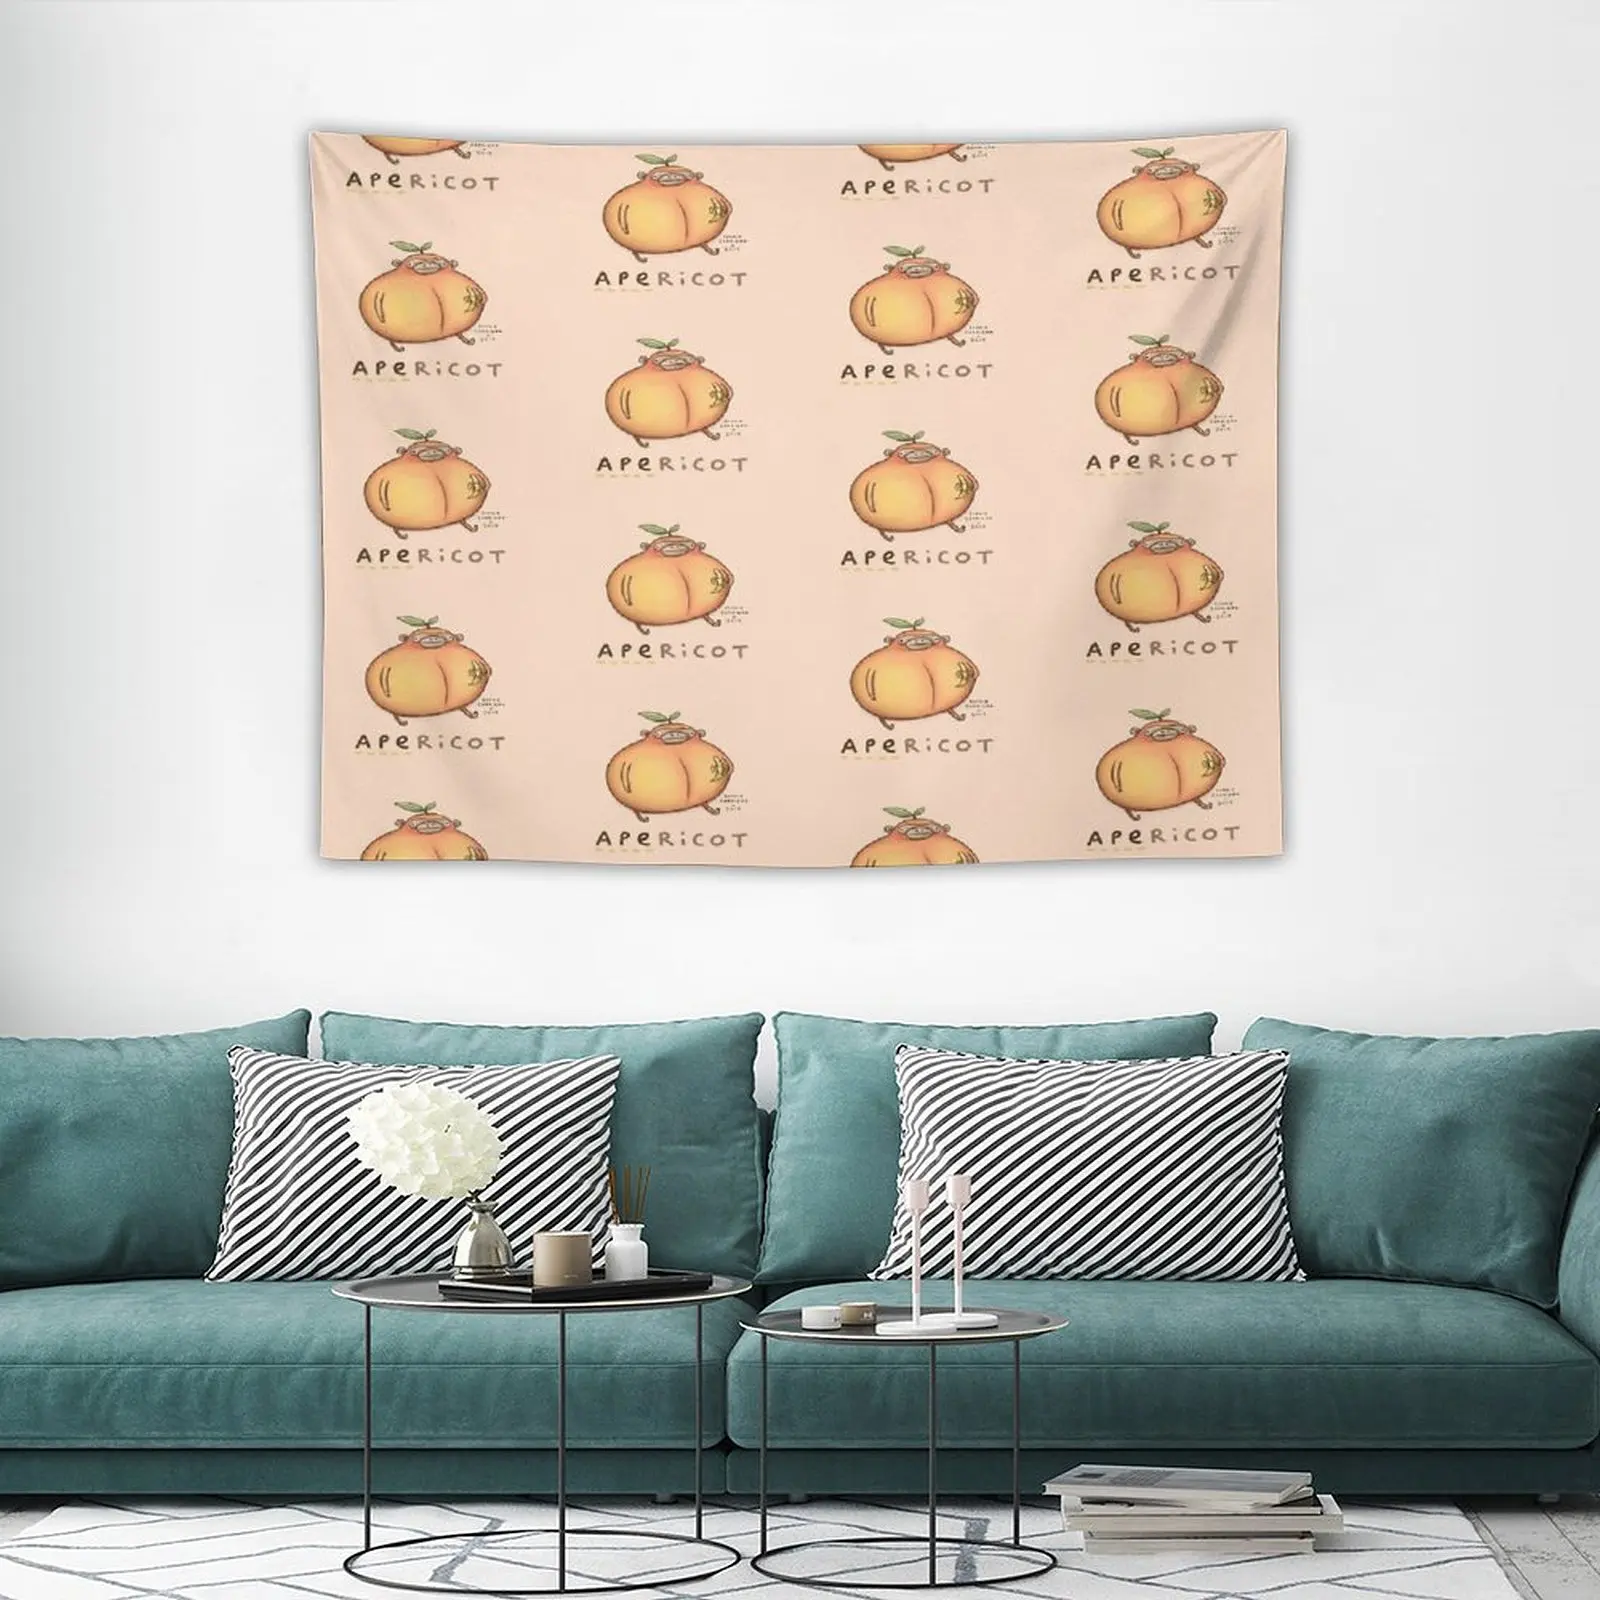 

Astrology Tapestry Apericot Kawaii Room Room Decorarion Aesthetic Wall Decoration Items Tapestry Aesthetic